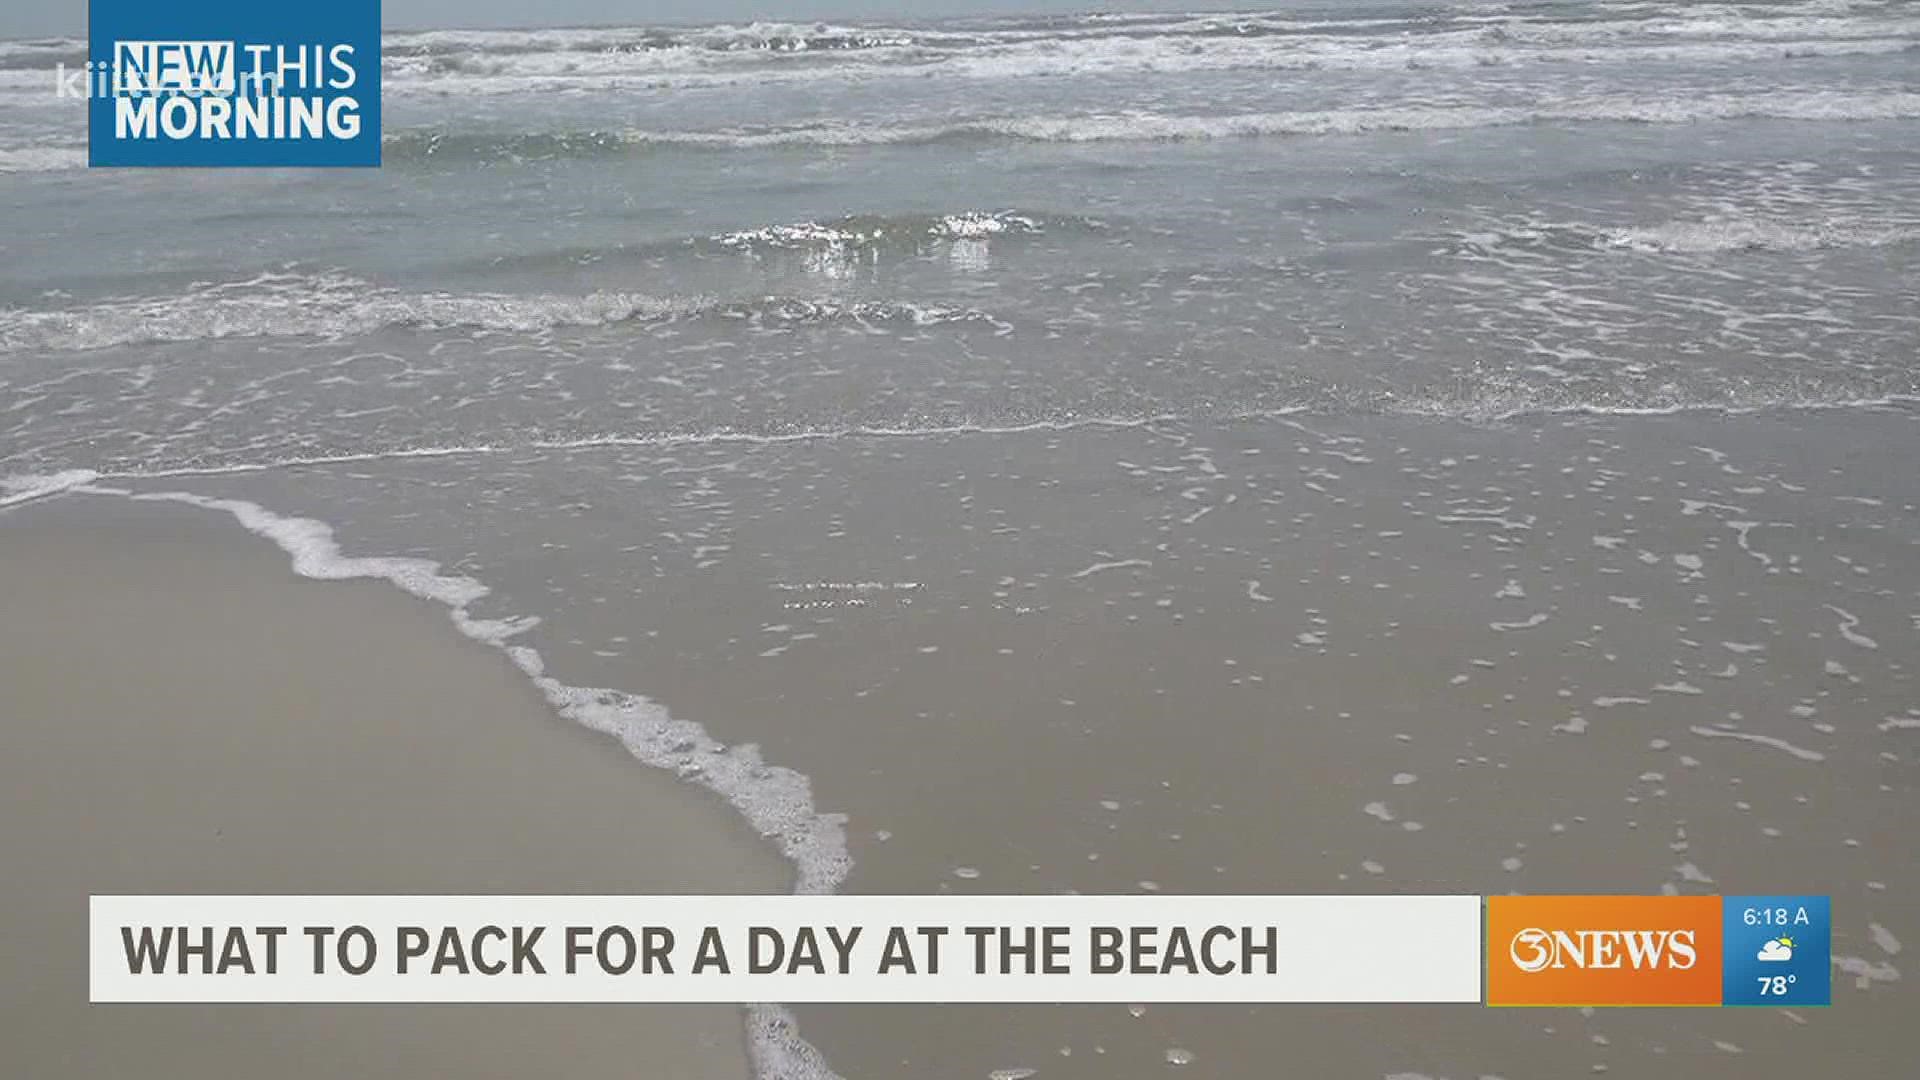 There’s plenty of tales on what to pack when you’re headed to the beach. Some say baby powder, vinegar to name a few but here's what doctors say you really need.